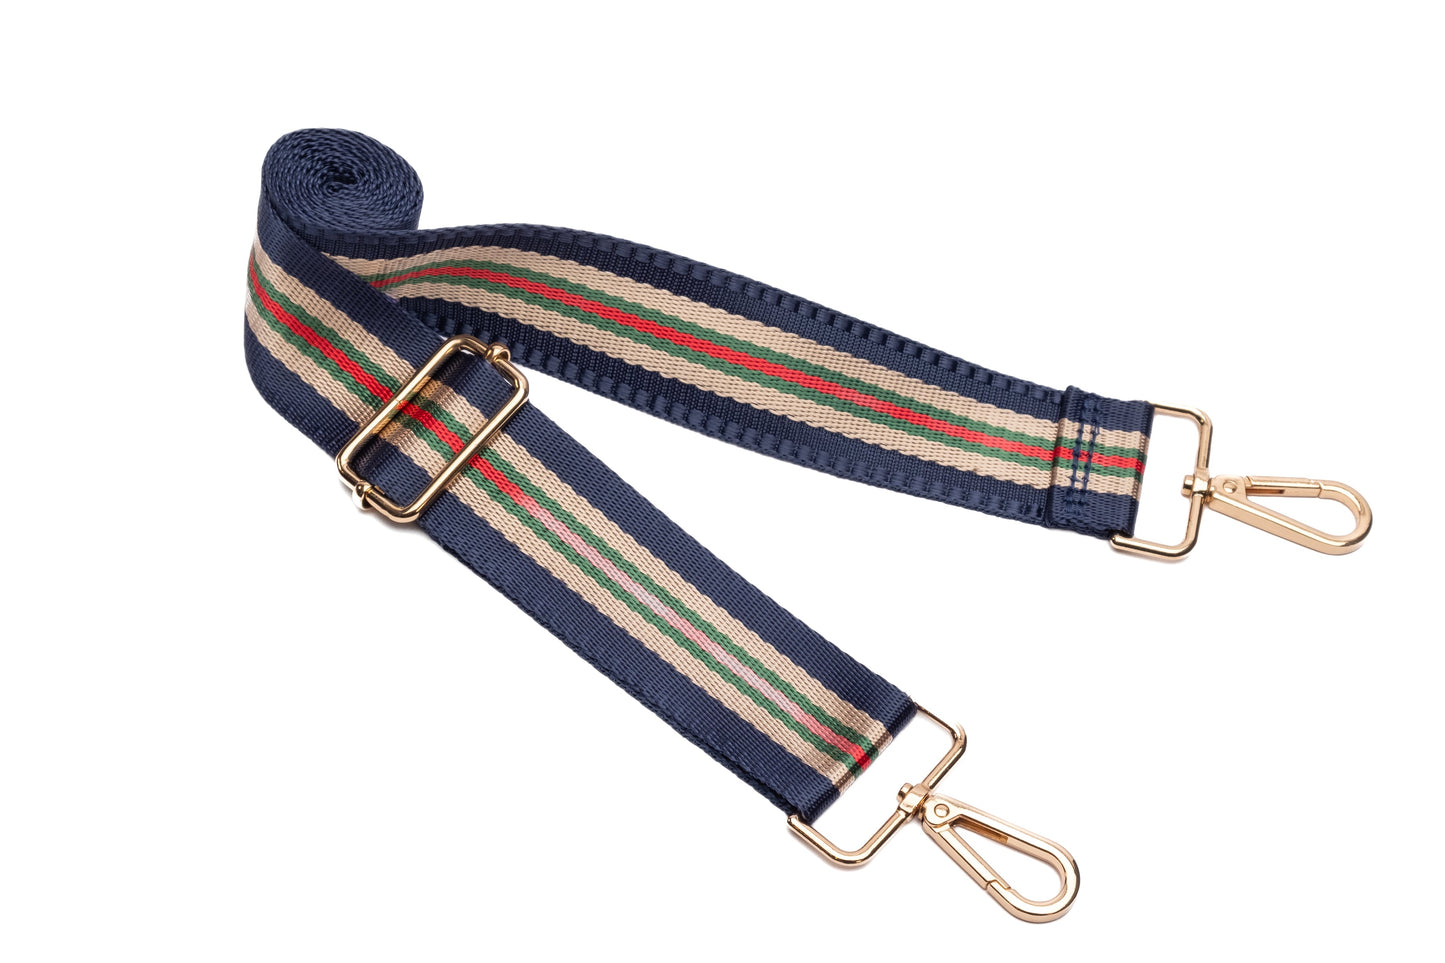 Wholesale - Navy, Tan, Green and Red Striped Strap with Gold hardware